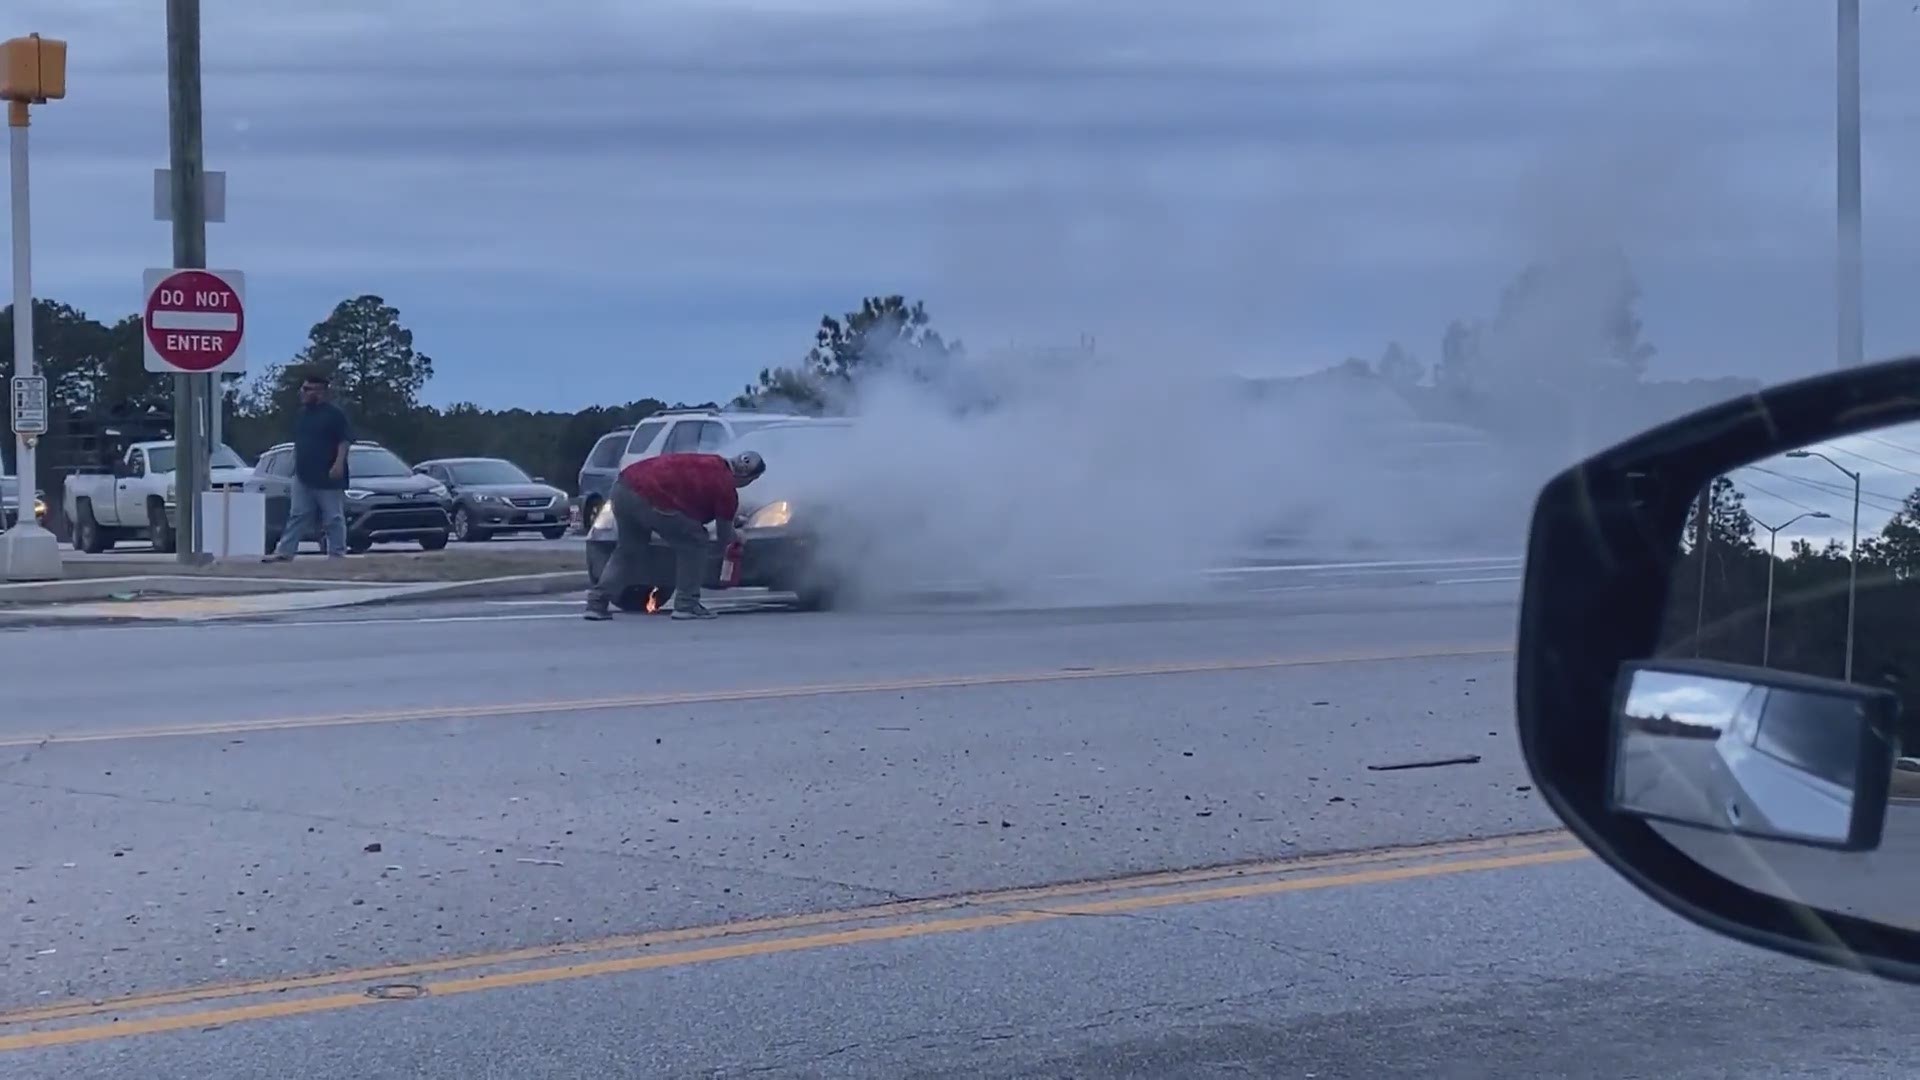 Vehicle on fire at Clemson Road by Bluecross Blueshield
Credit: Delaine Smith